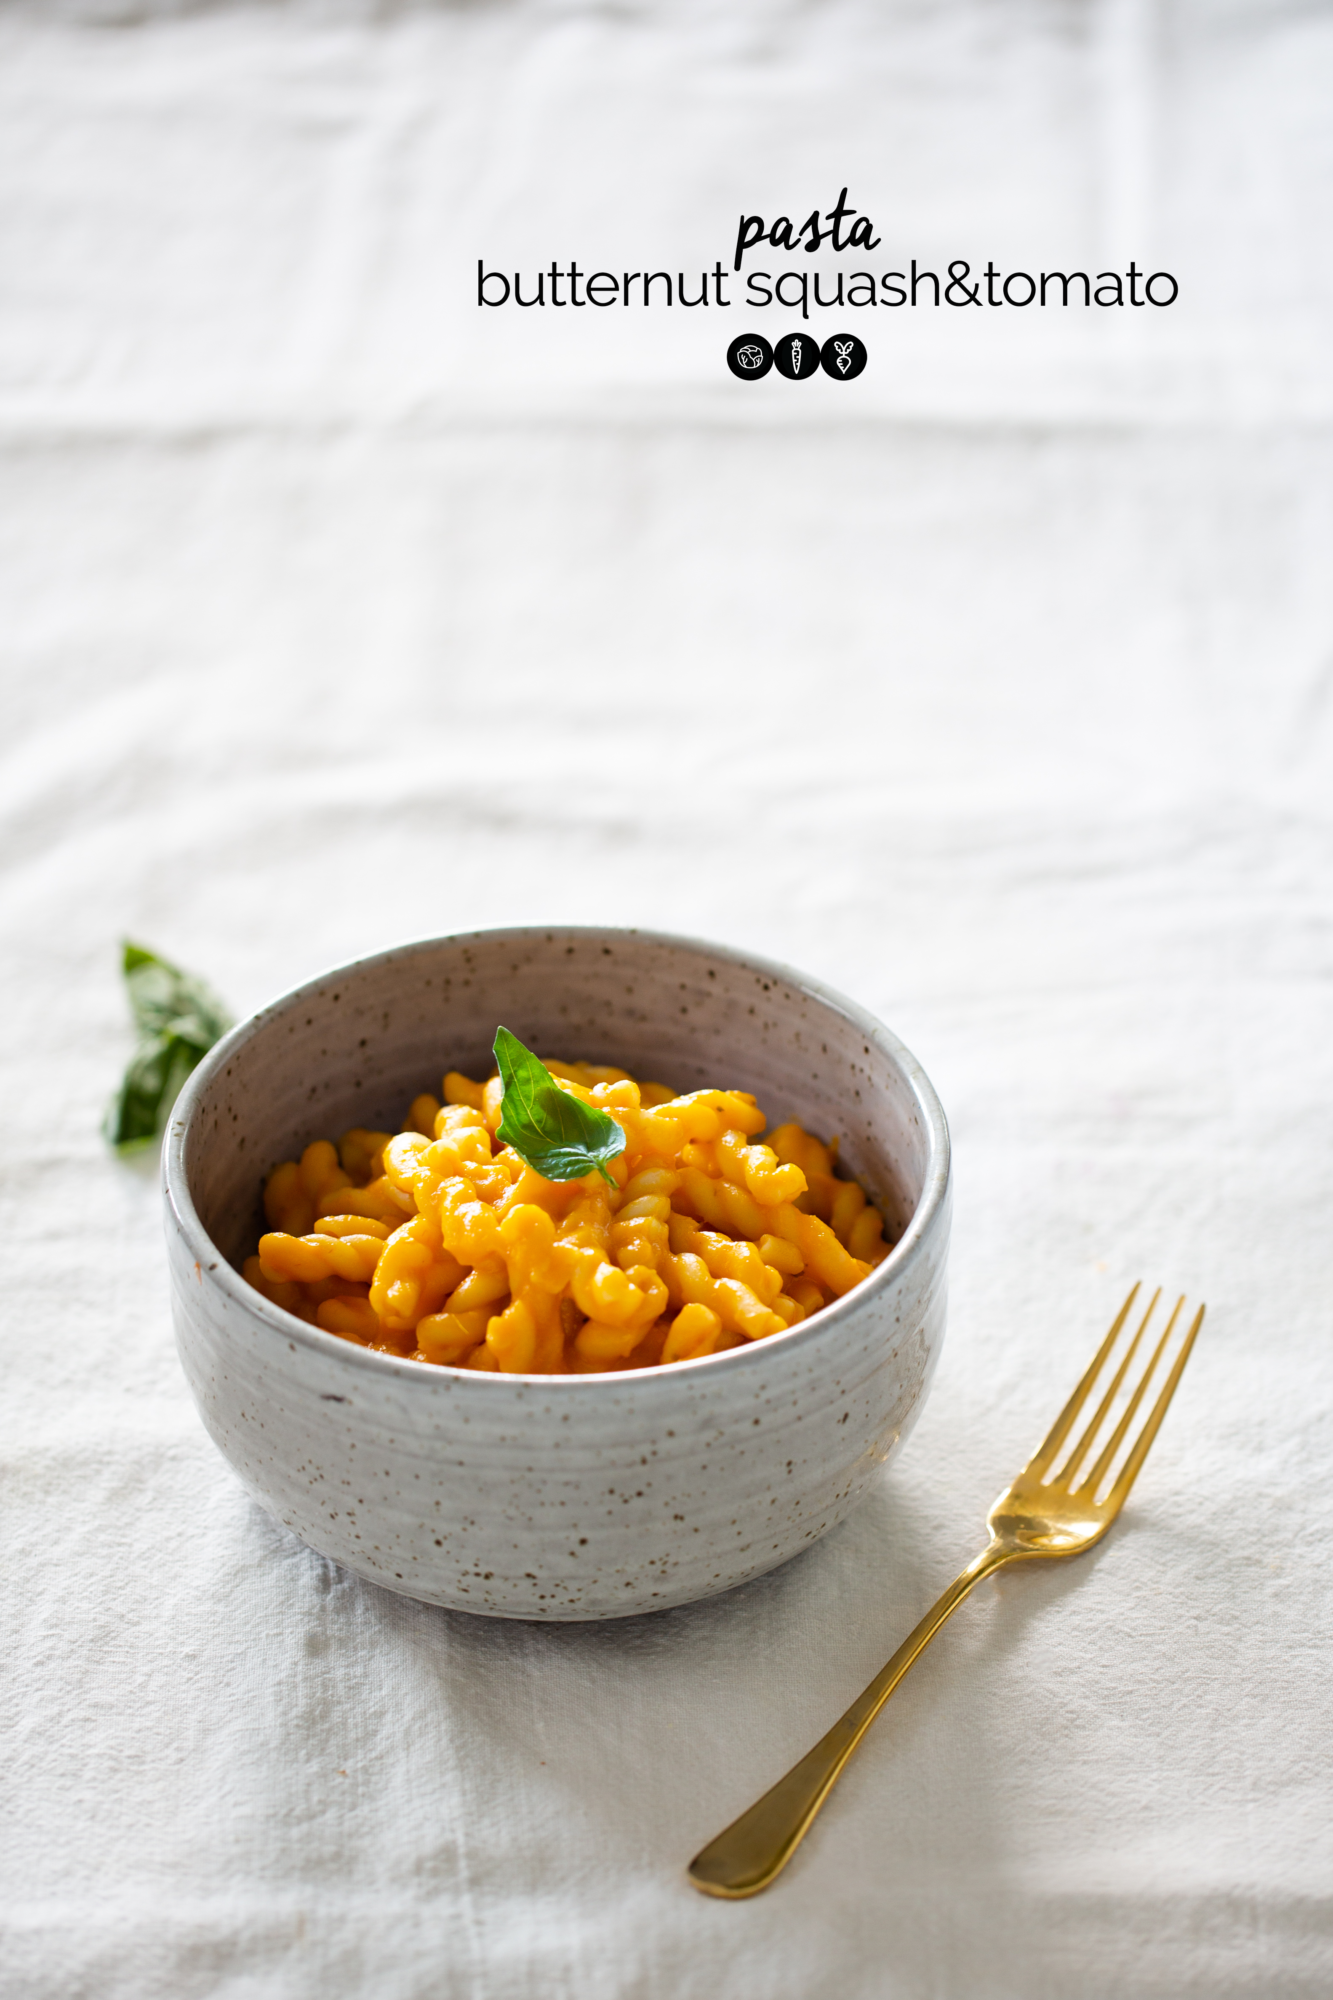 https://www.alecooks.com/wp-content/uploads/2019/10/pin.-Pasta-con-tomate-y-calabaza-24-of-33-1333x2000.png